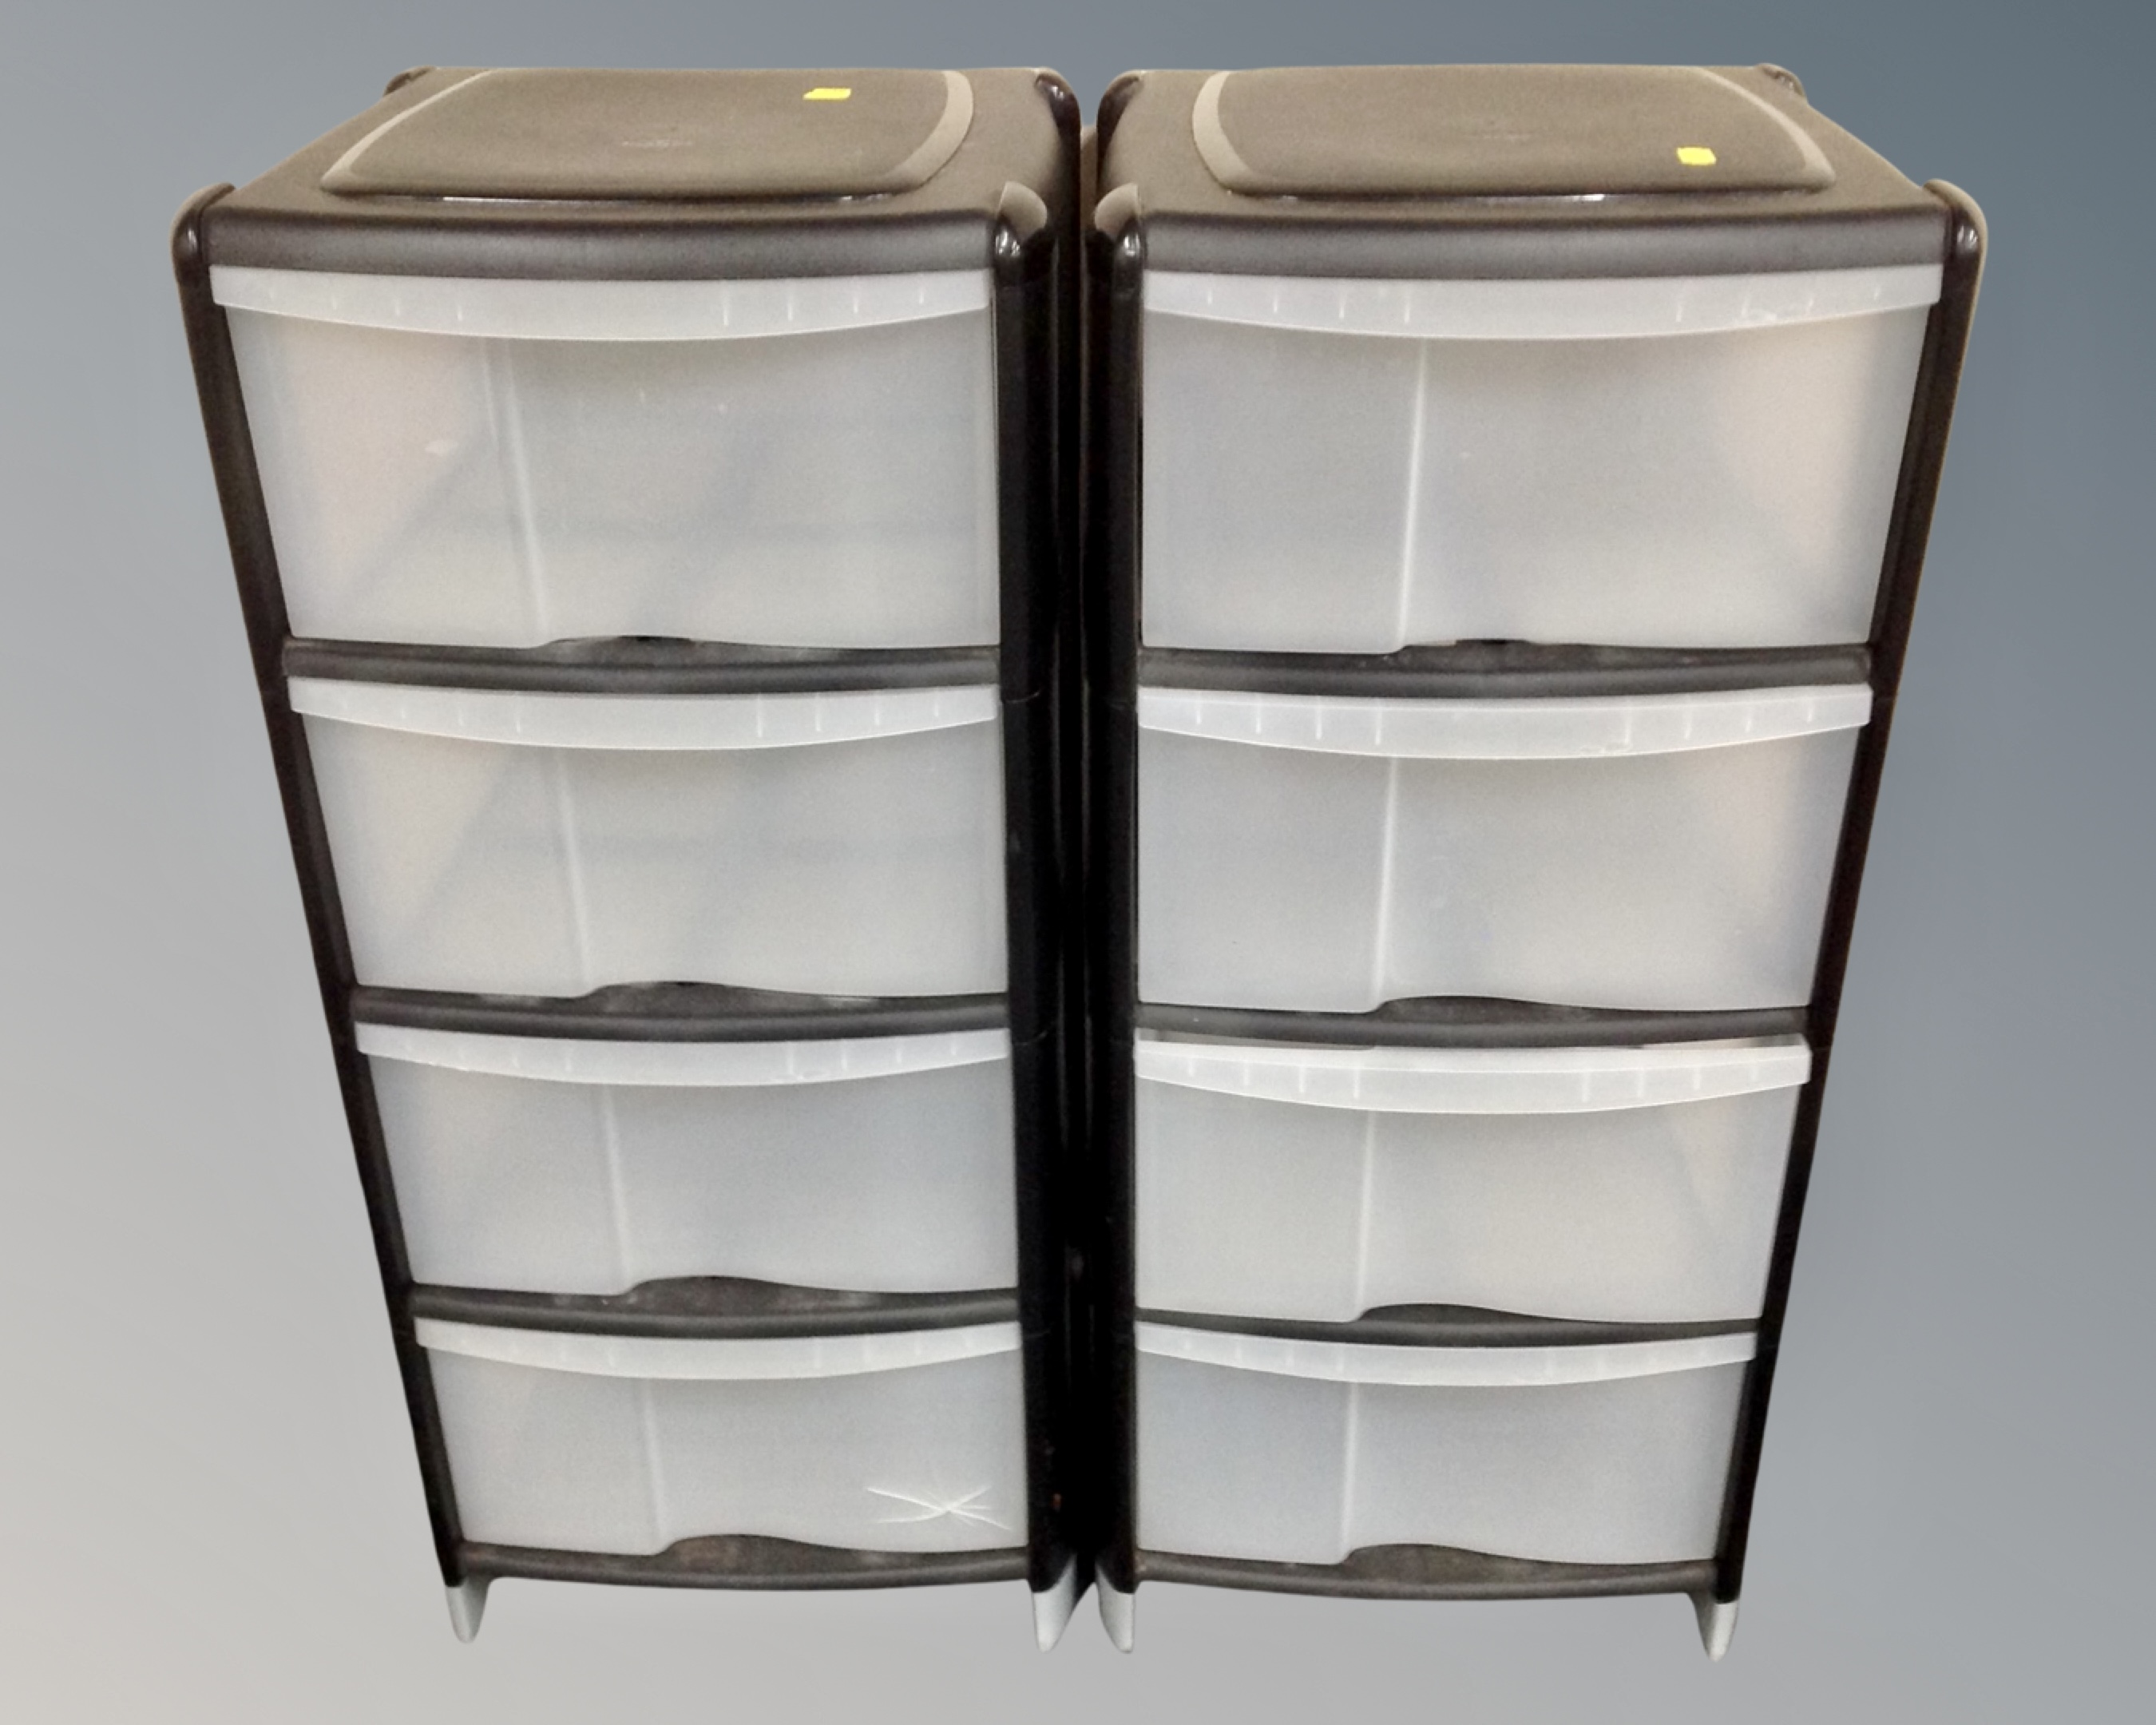 Two four drawer plastic storage chests.